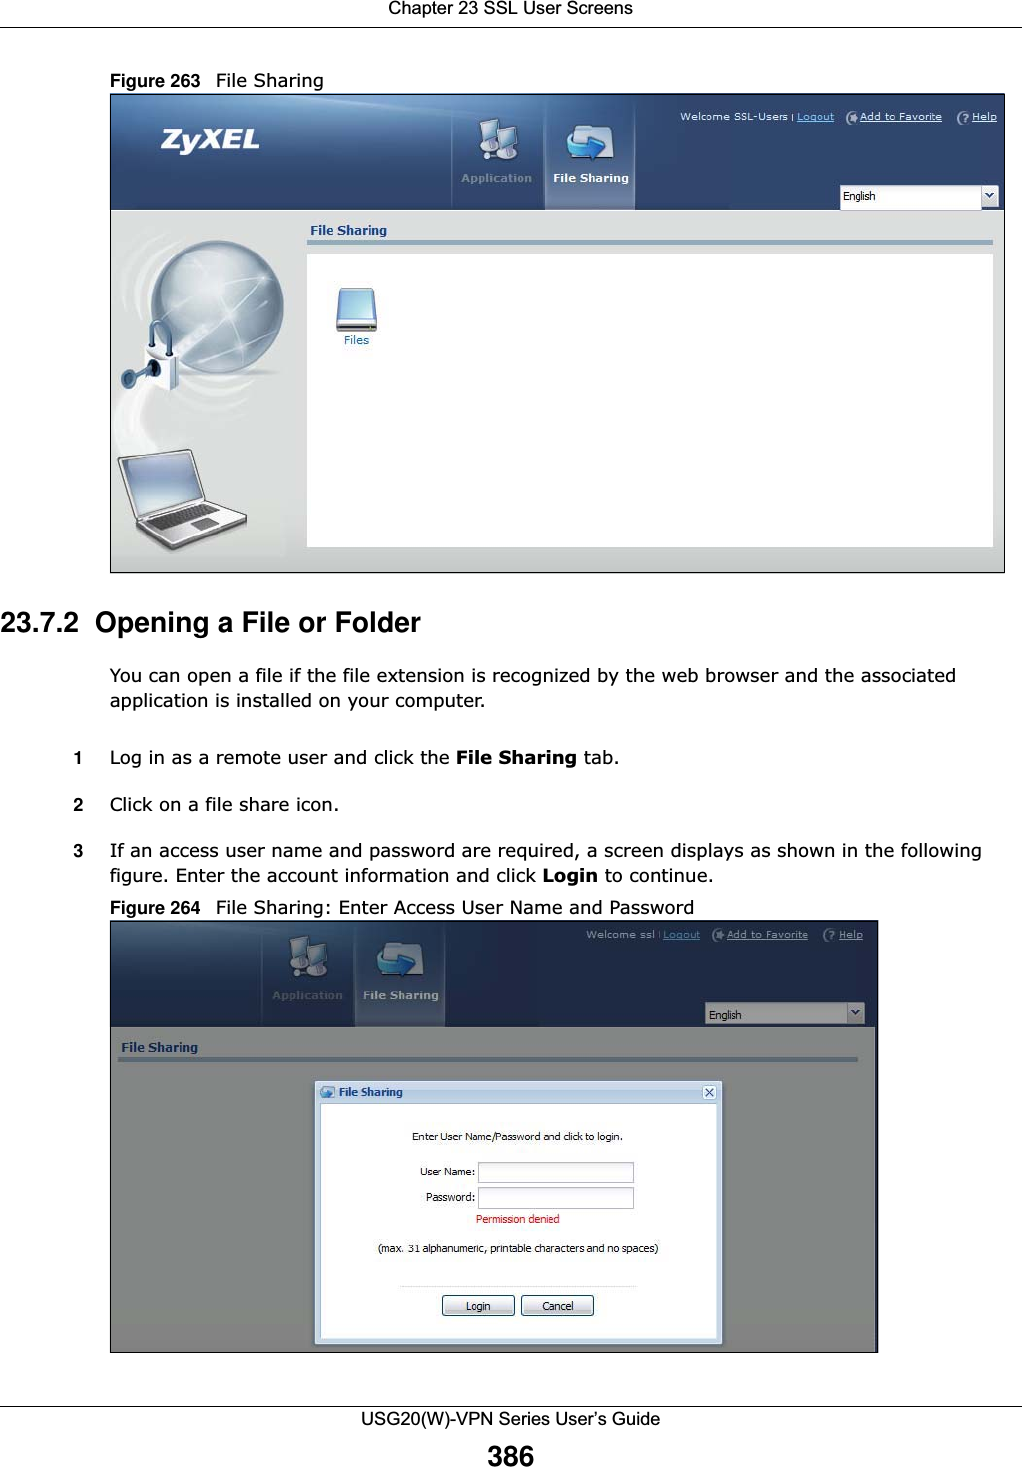 Chapter 23 SSL User ScreensUSG20(W)-VPN Series User’s Guide386Figure 263   File Sharing 23.7.2  Opening a File or FolderYou can open a file if the file extension is recognized by the web browser and the associated application is installed on your computer. 1Log in as a remote user and click the File Sharing tab. 2Click on a file share icon. 3If an access user name and password are required, a screen displays as shown in the following figure. Enter the account information and click Login to continue. Figure 264   File Sharing: Enter Access User Name and Password  